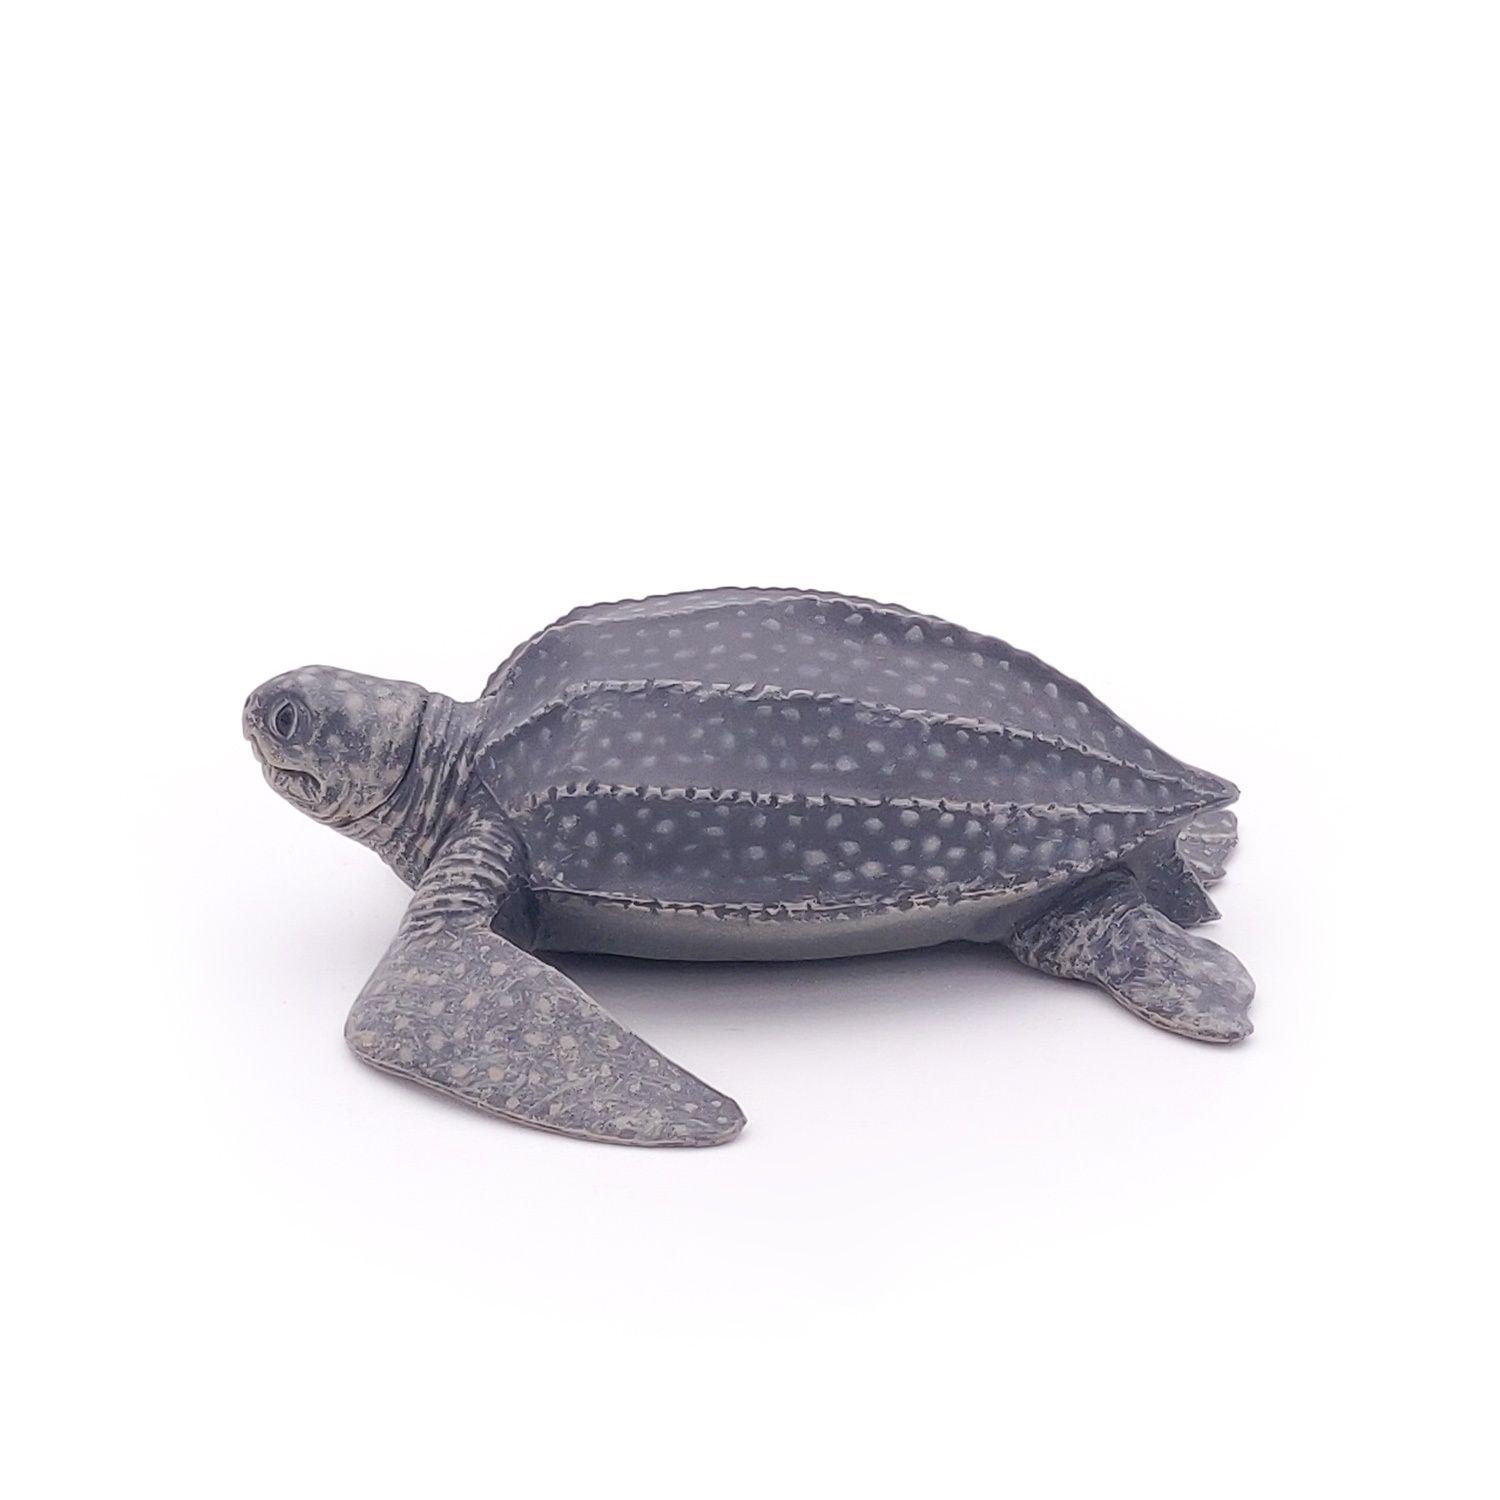 Figurine tortue caouanne - Papo